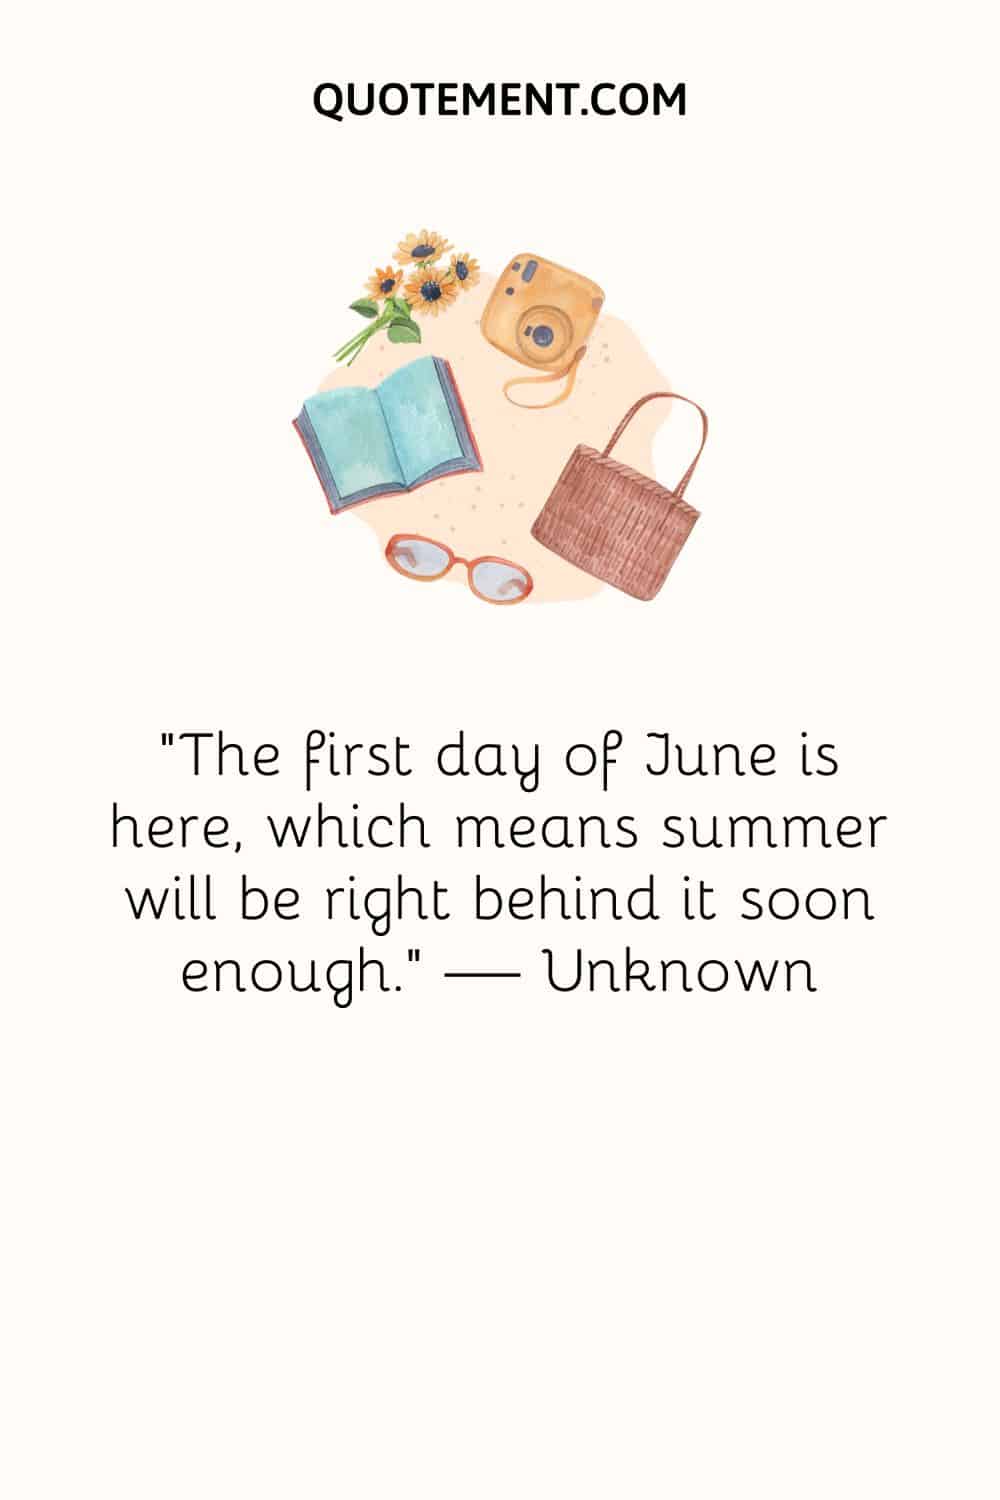 welcome june quotes